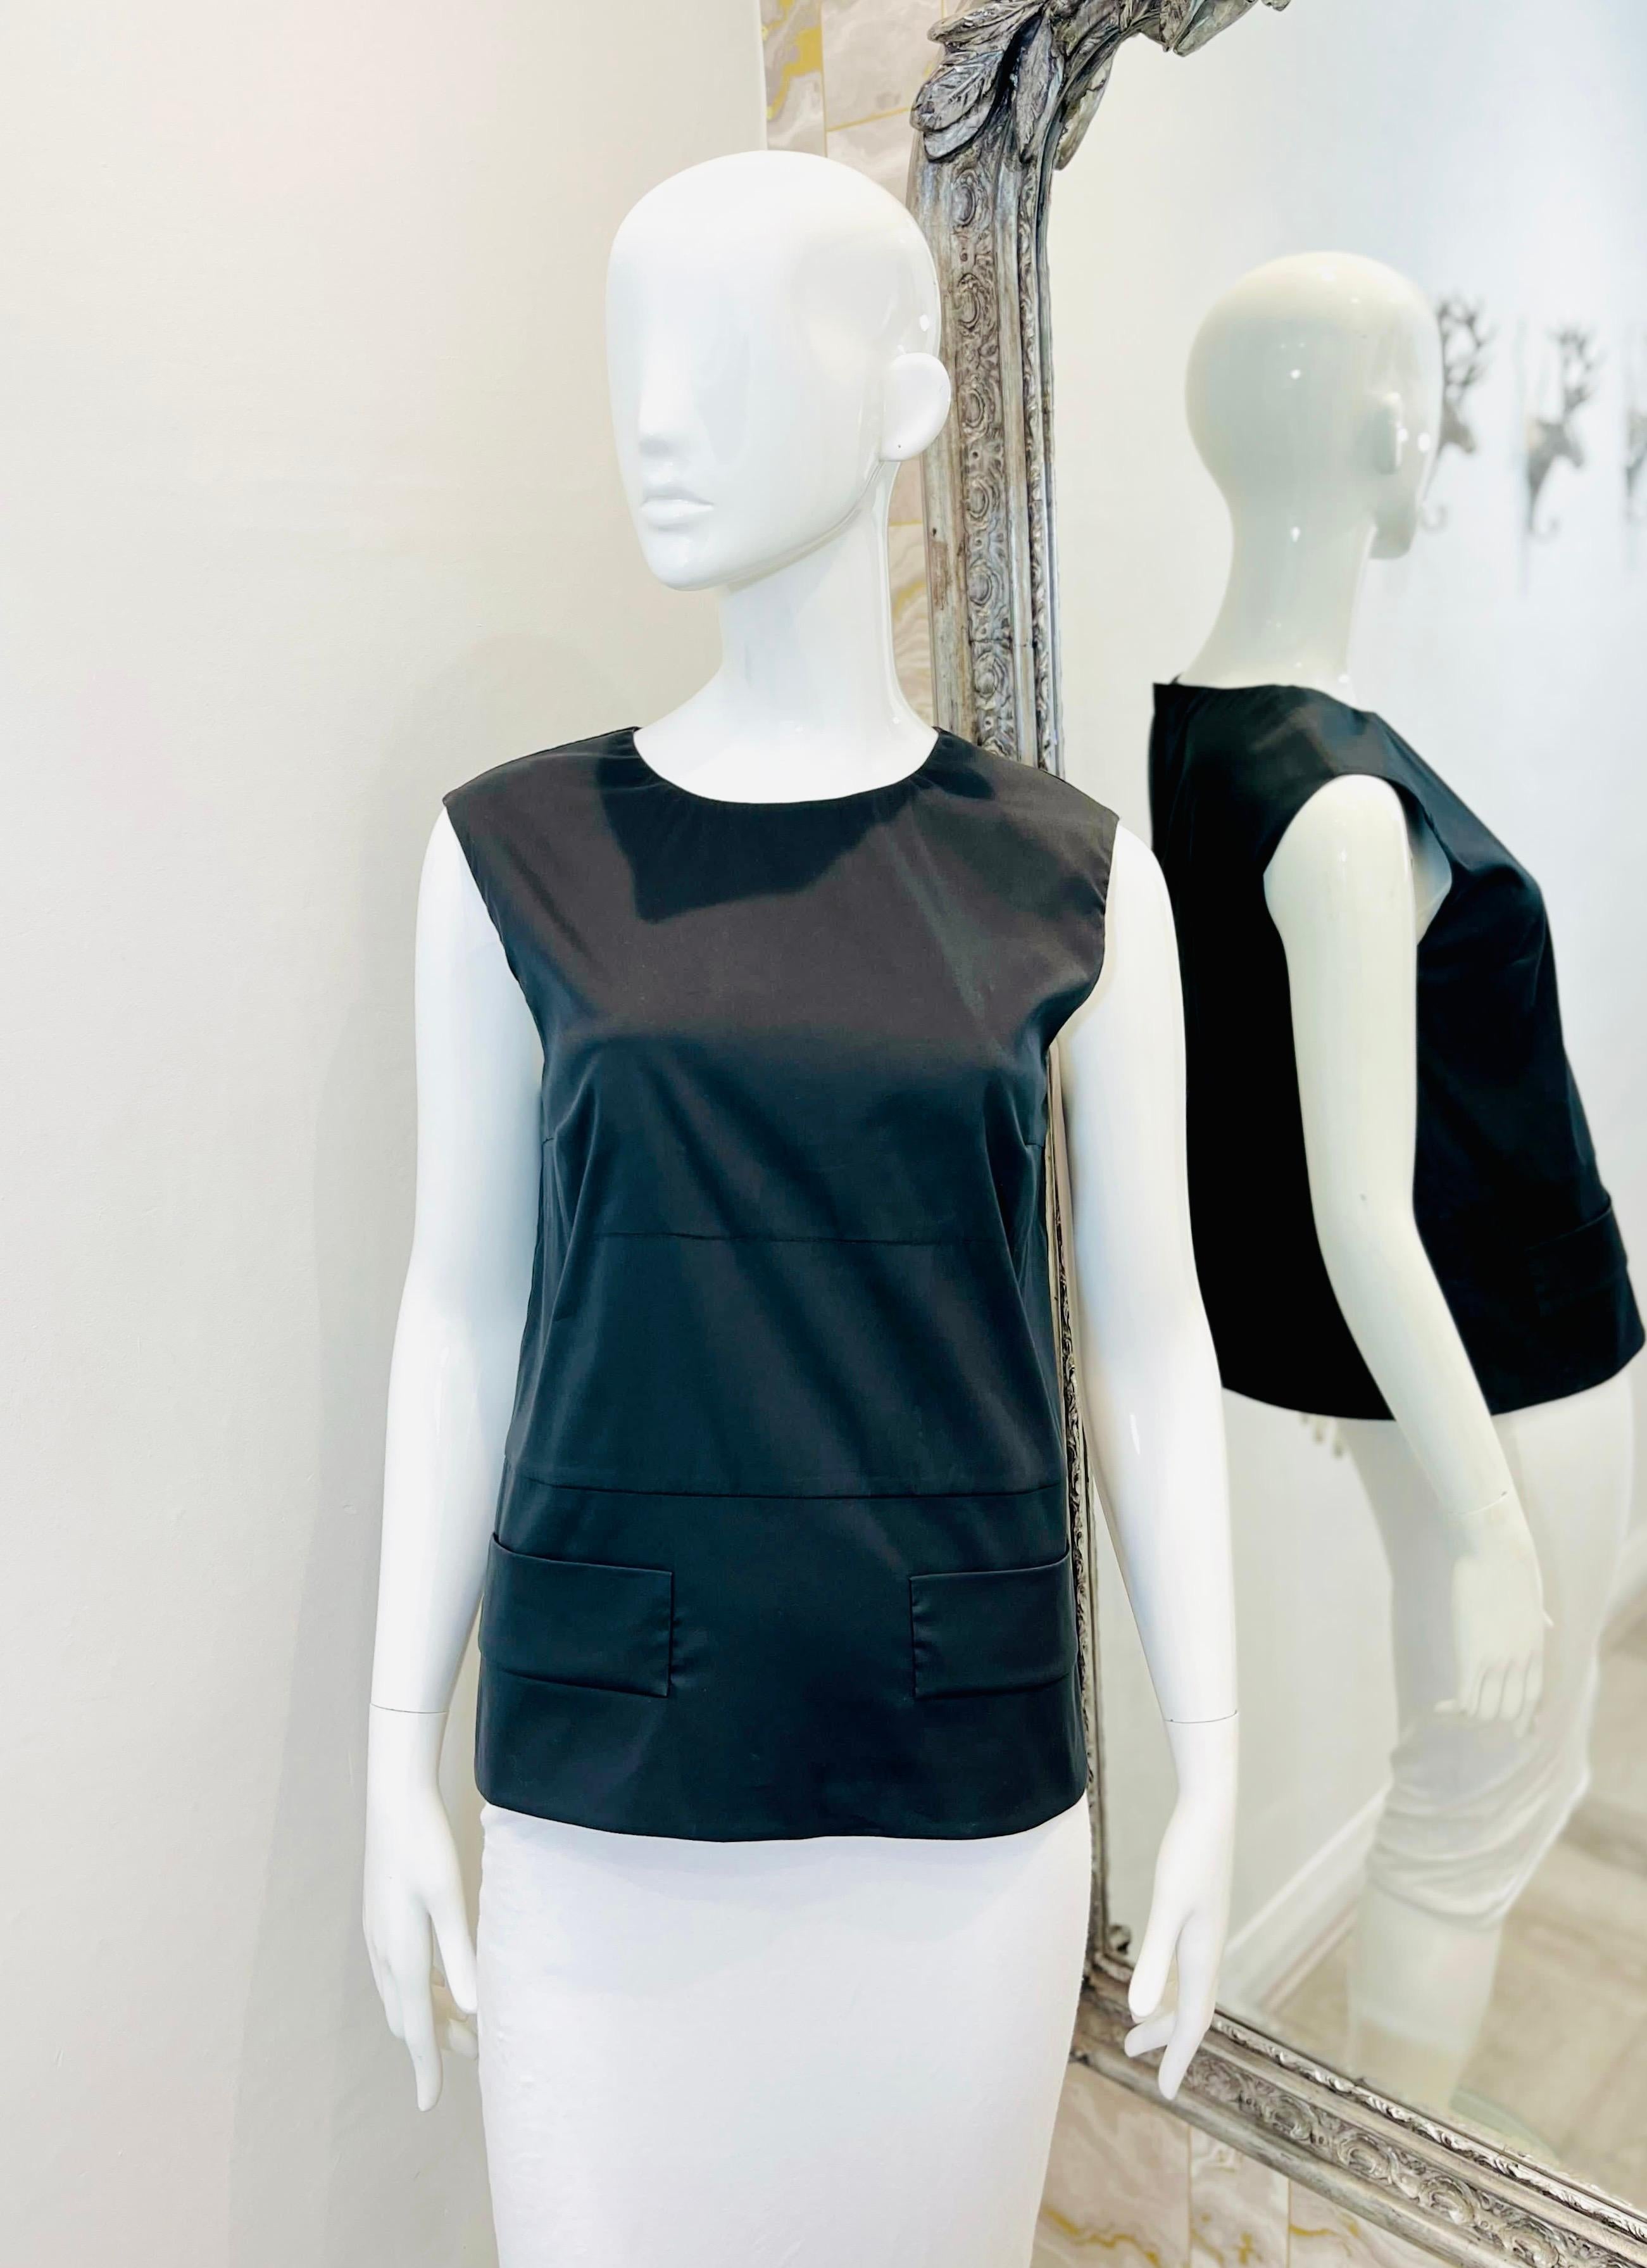 Prada Cotton Top

Black, sleeveless top designed with patch pockets to the front.

Detailed with centre button fastening to rear and round neckline.

Size – 42IT

Condition – Very Good (Minor washable mark to the shoulder)

Composition – 78% Cotton,